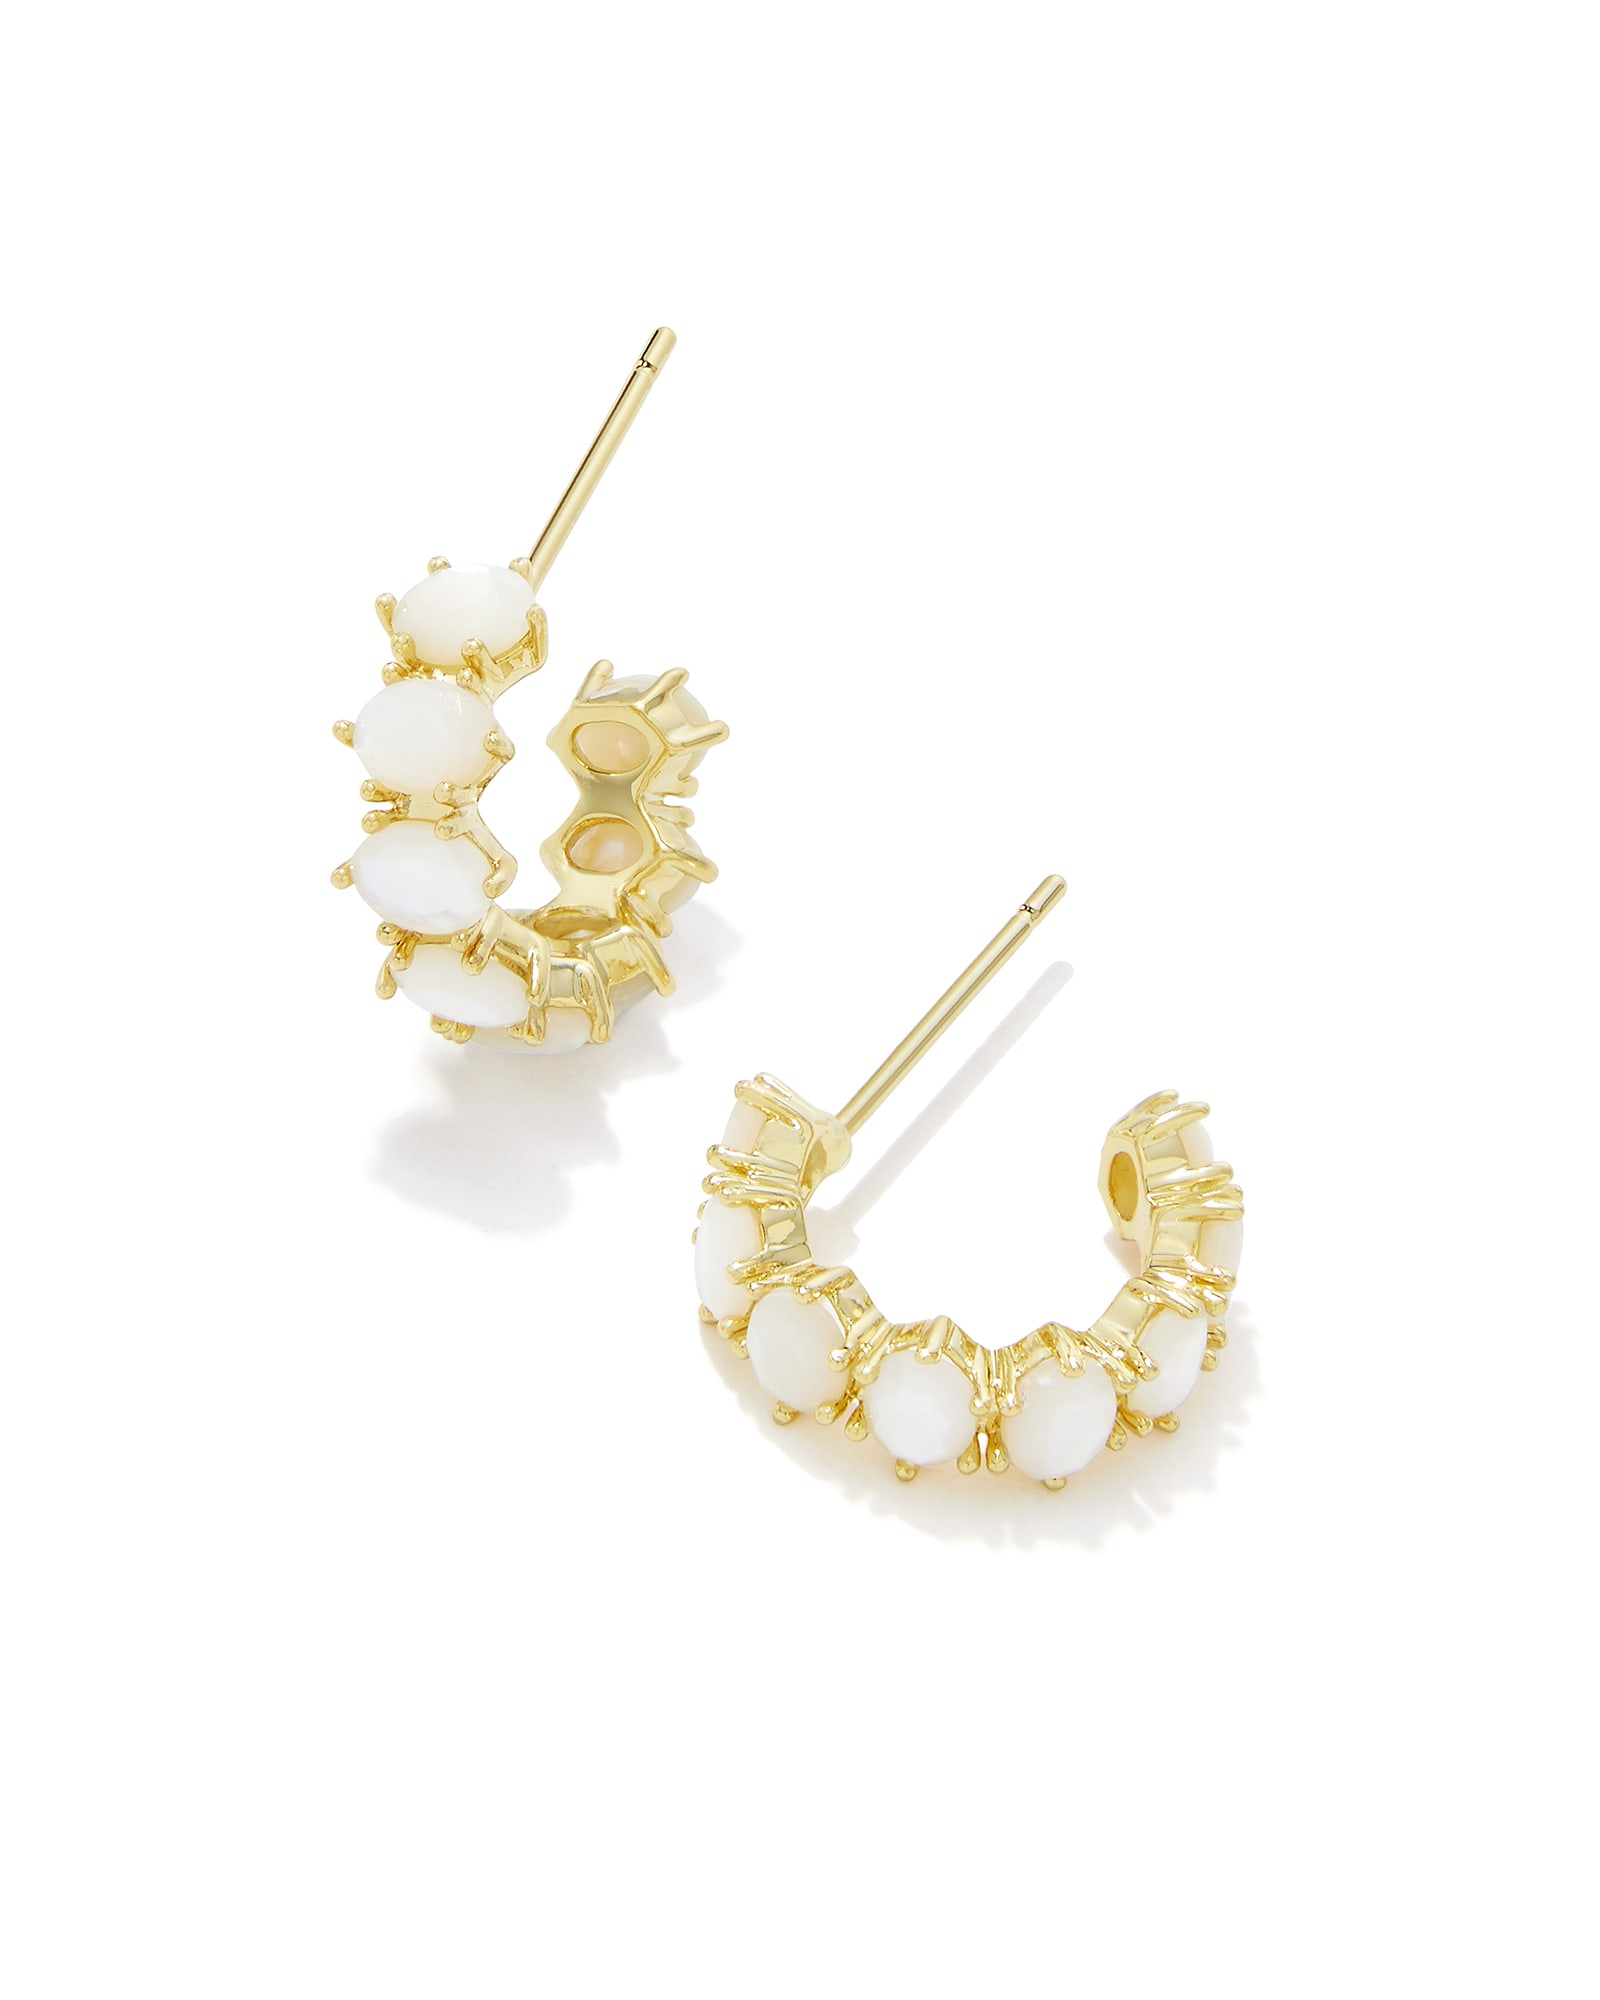 Photos - Earrings KENDRA SCOTT Cailin Gold Huggie  in Ivory Mother-of-Pearl | Nano C 